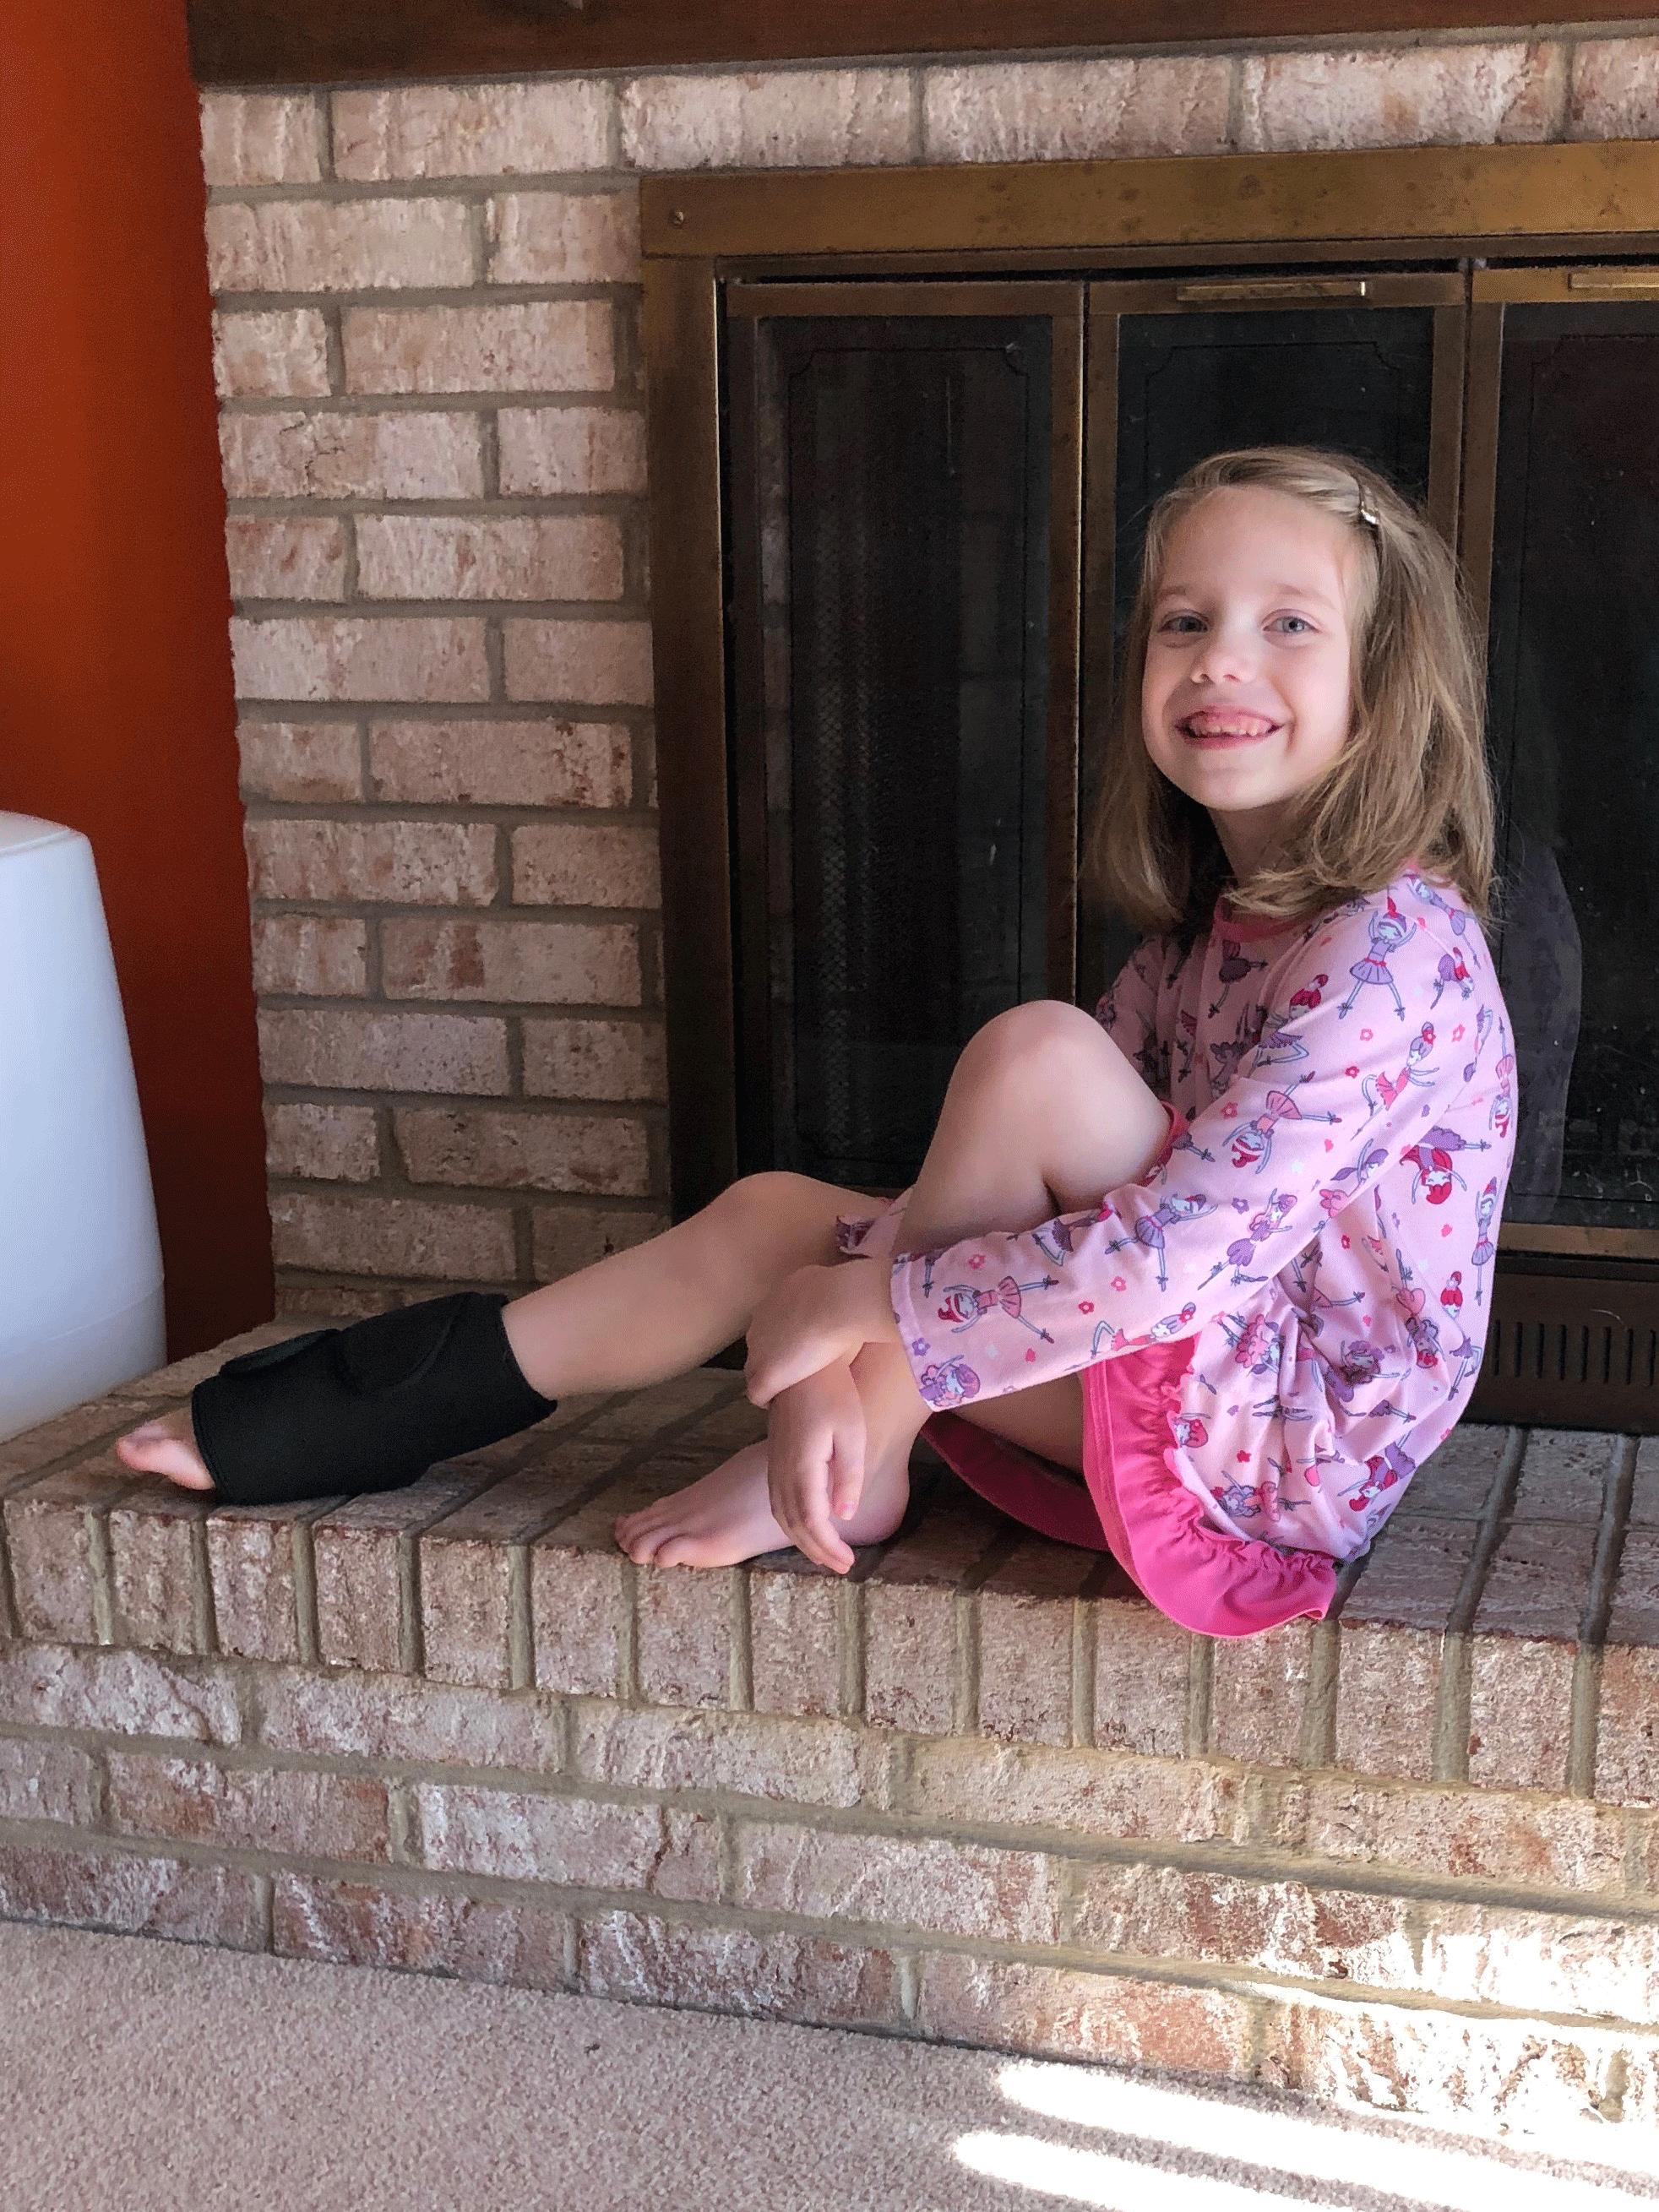 A girl sitting on the ground with a soft ice wrap on her foot